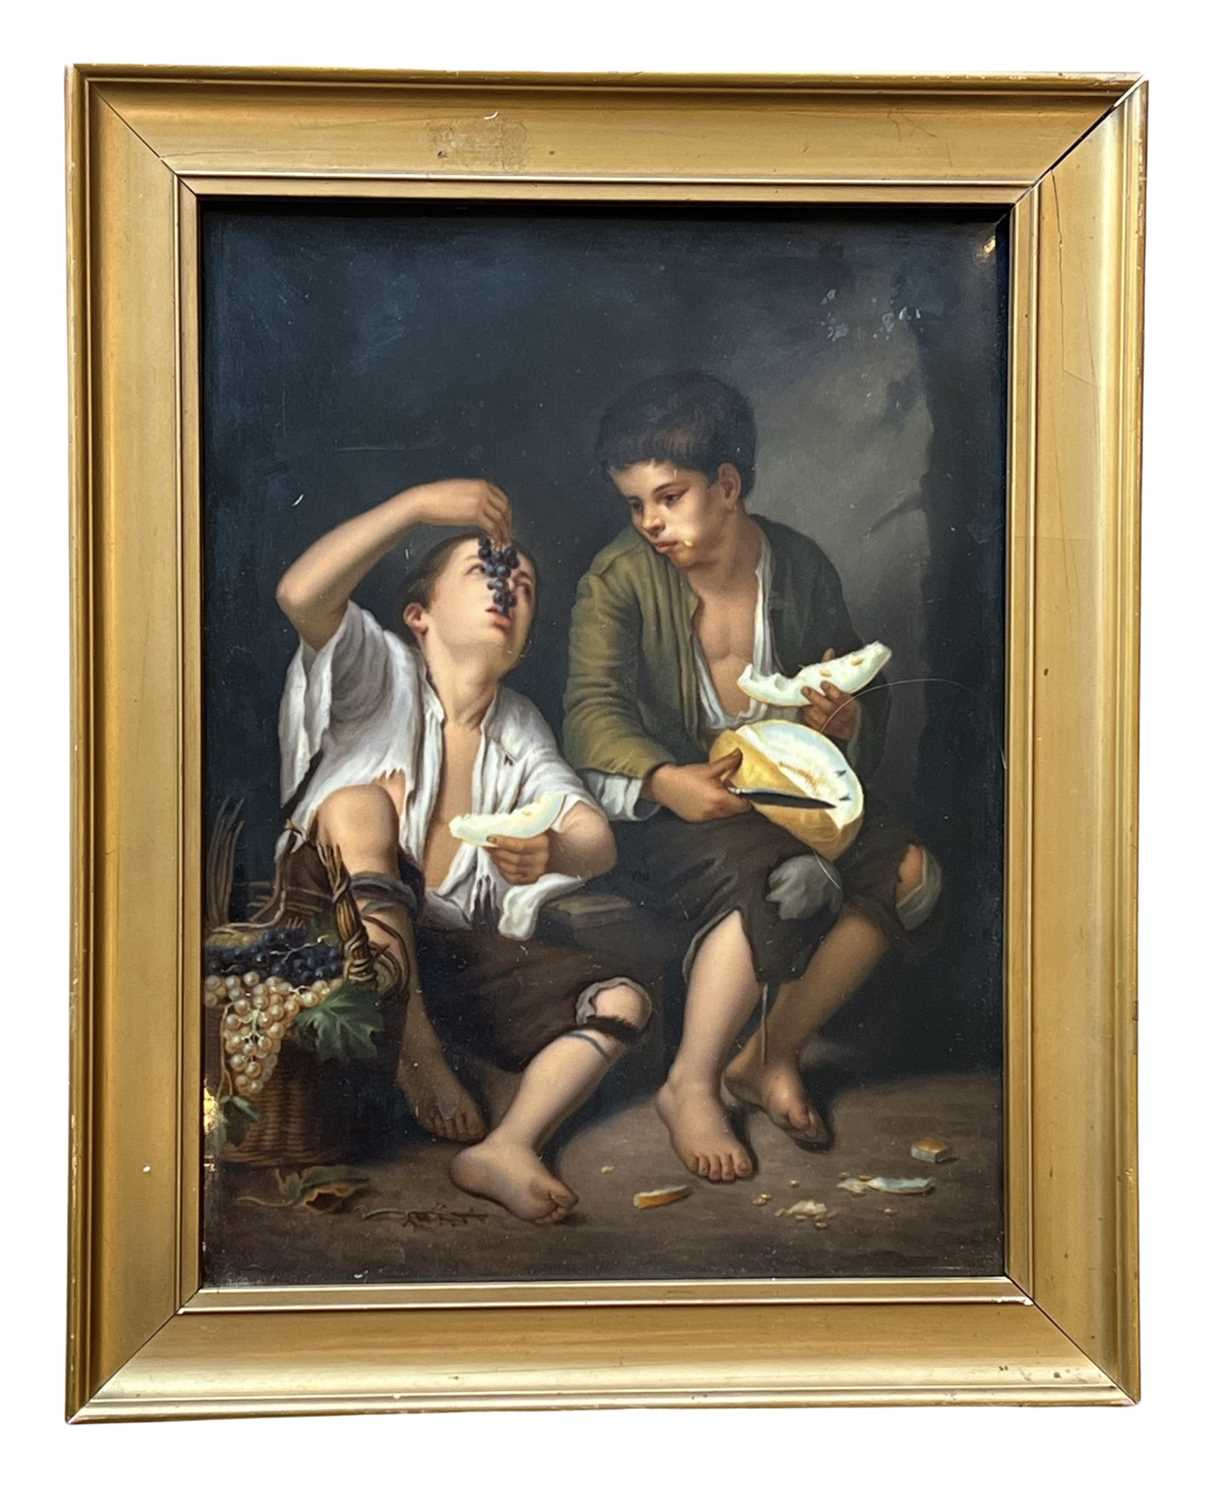 KPM: A LATE 19TH CENTURY BERLIN PORCELAIN PANEL AFTER MURILLO 'THE GRAPE AND MELON EATERS'